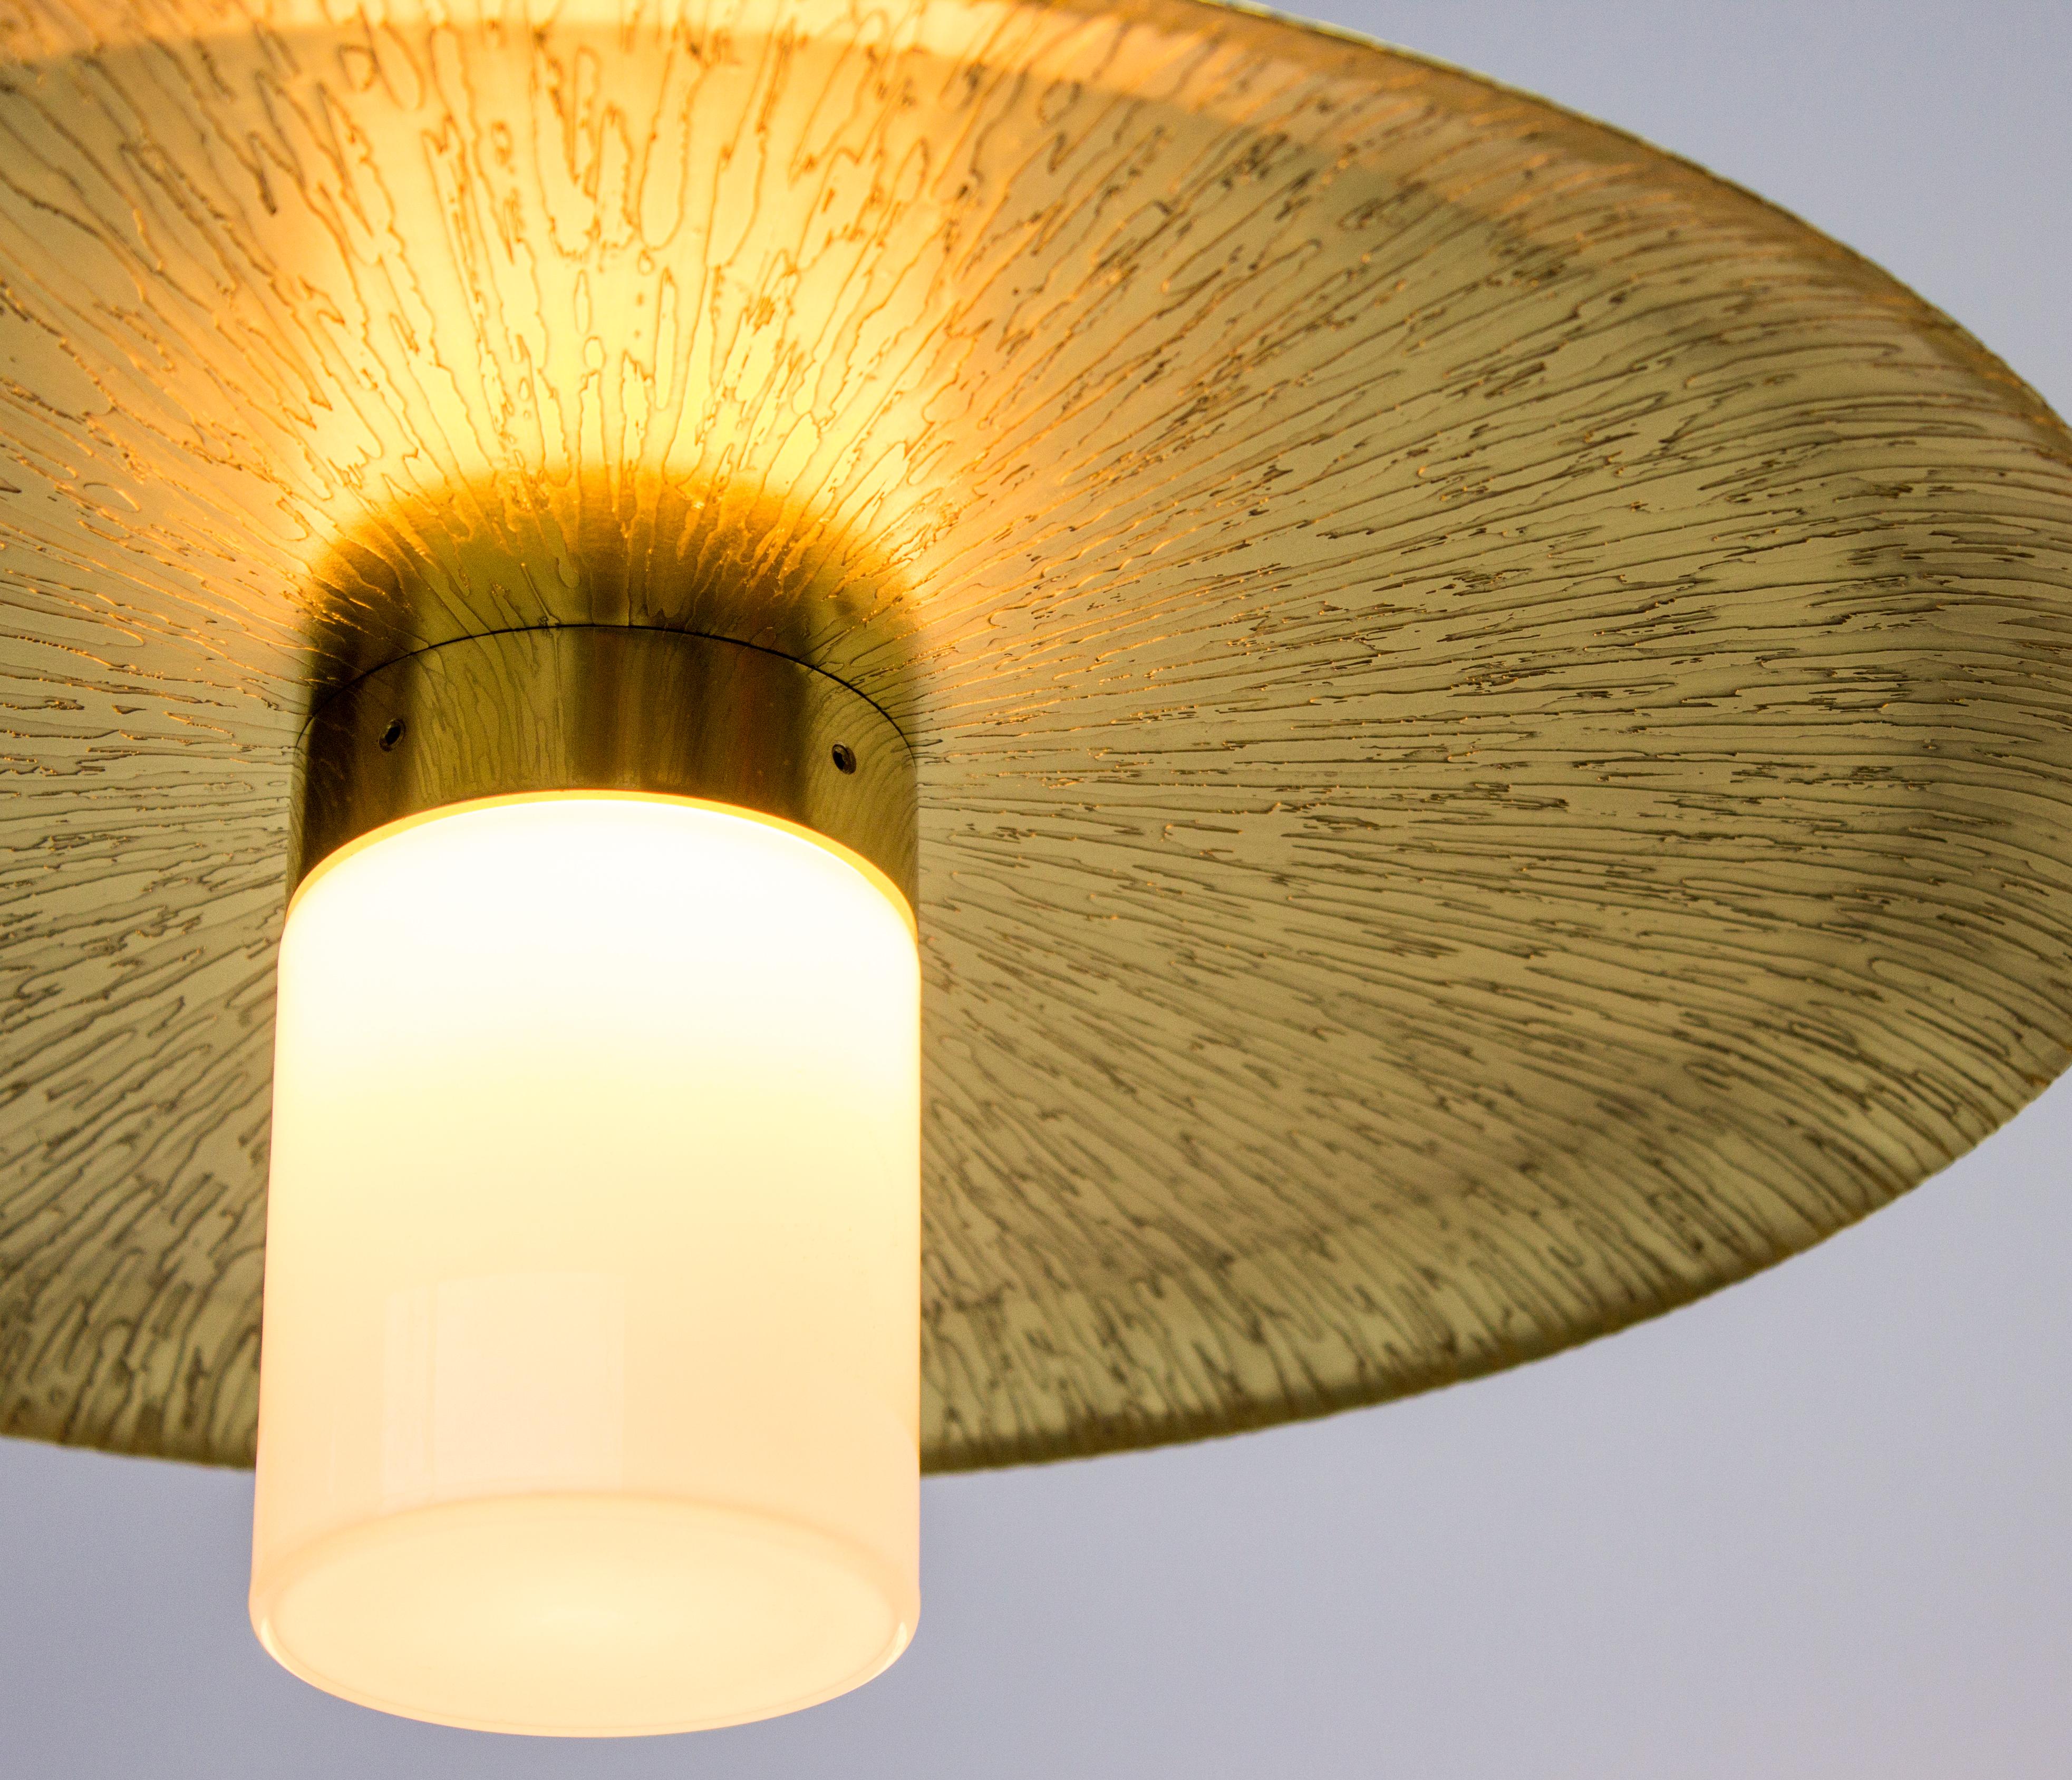 Other Arthur Pendant with Etched & Polished Sunburst Brass Shade, Handblown Milk Glass For Sale